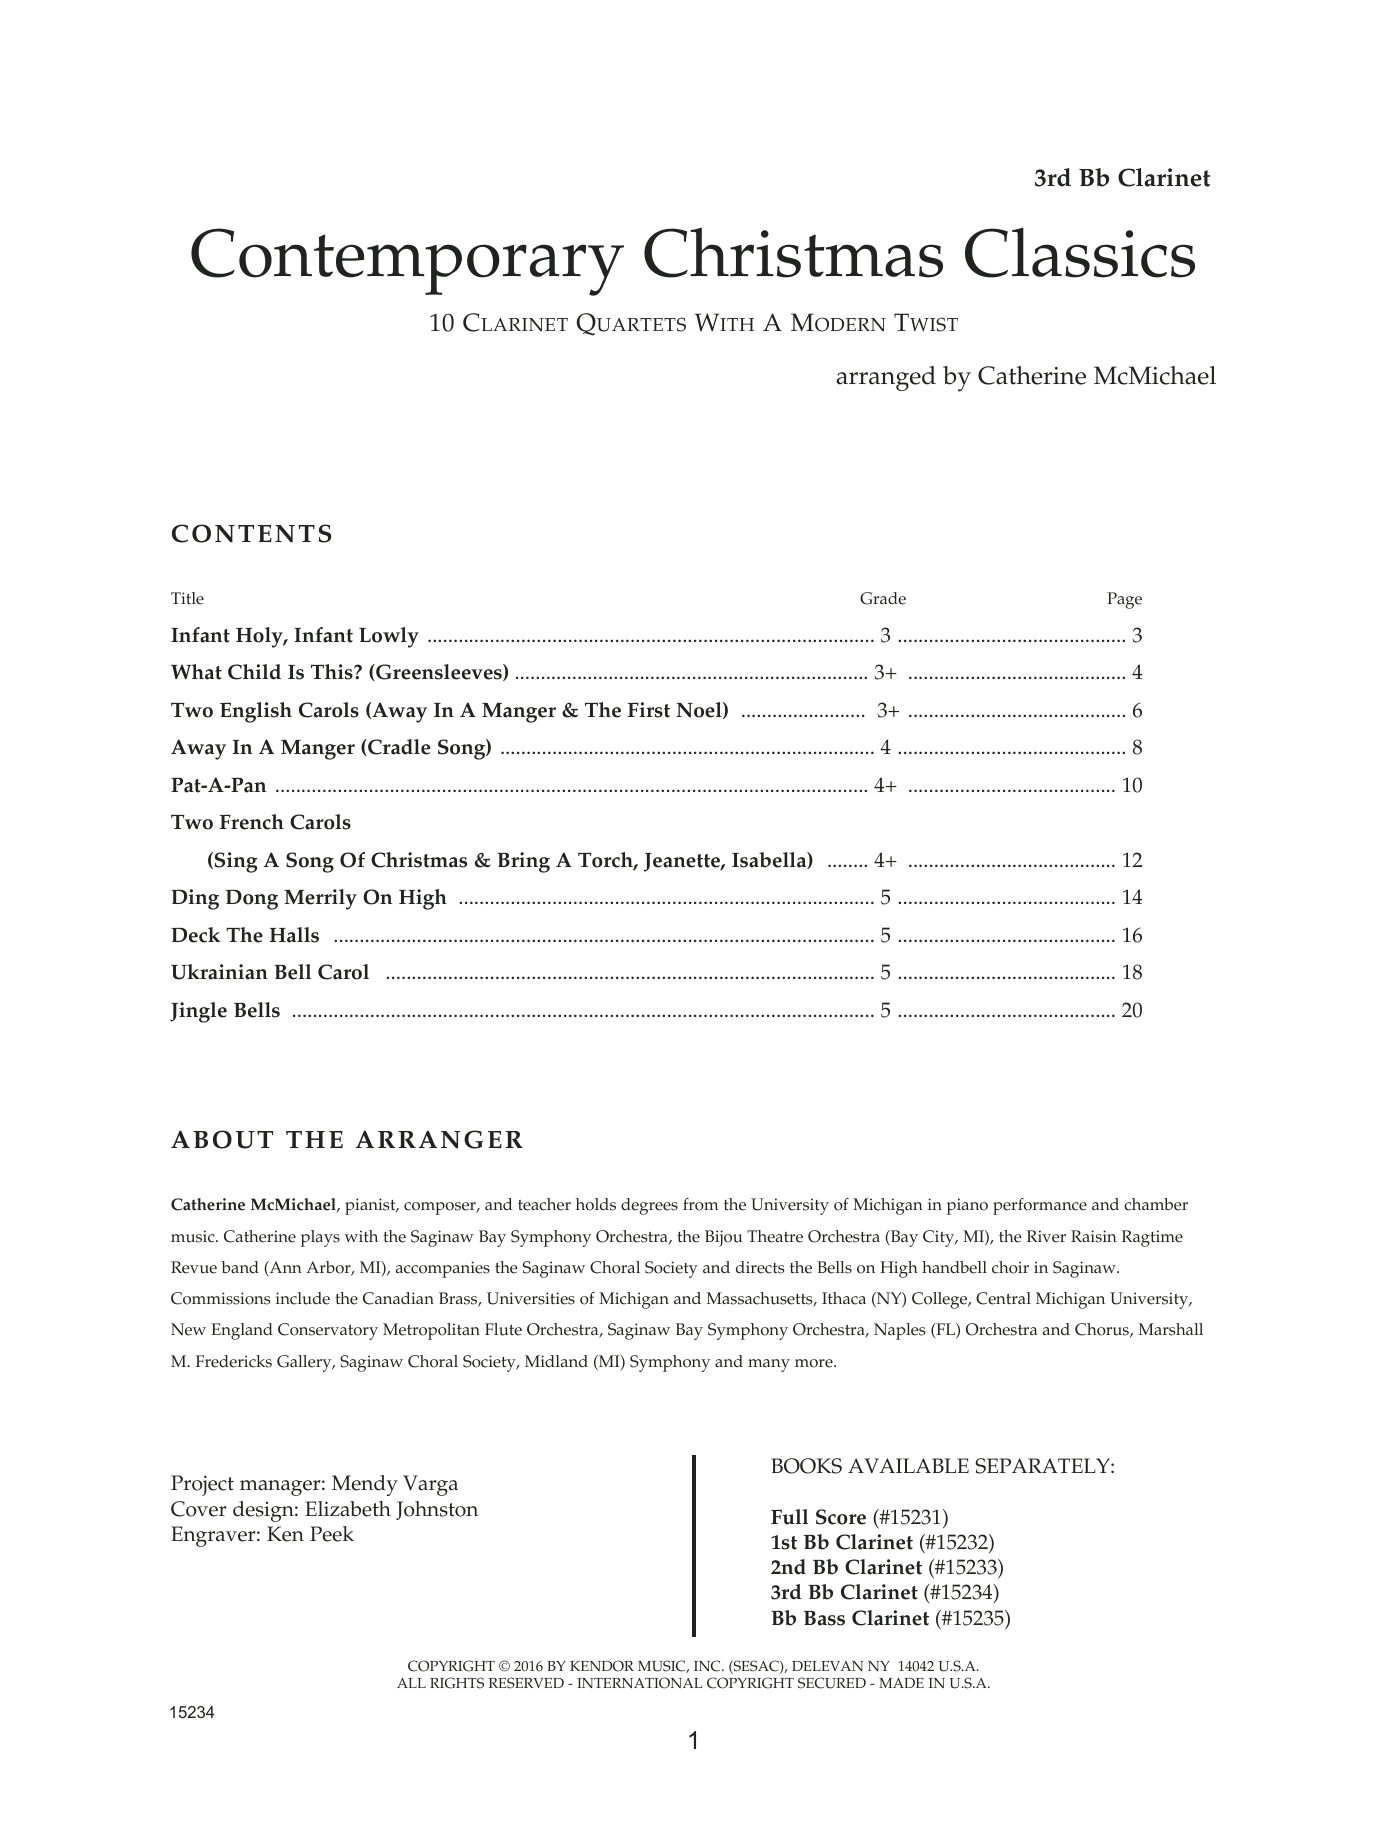 Download Catherine McMichael Contemporary Christmas Classics - 3rd B Sheet Music